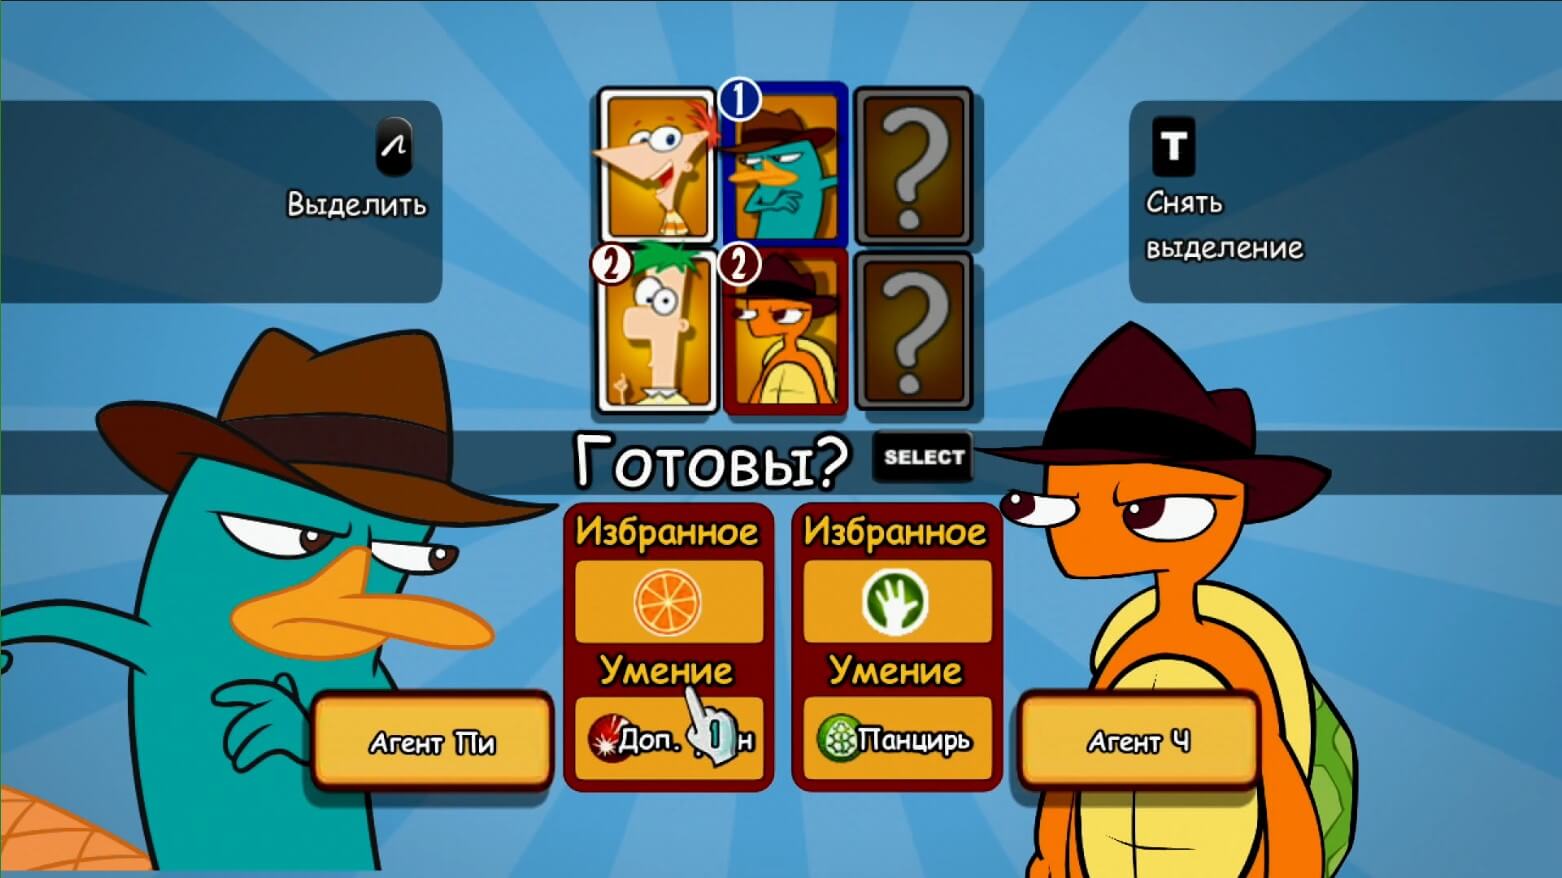 Phineas and Ferb Across the 2nd Dimension - геймплей игры на PlayStation 3